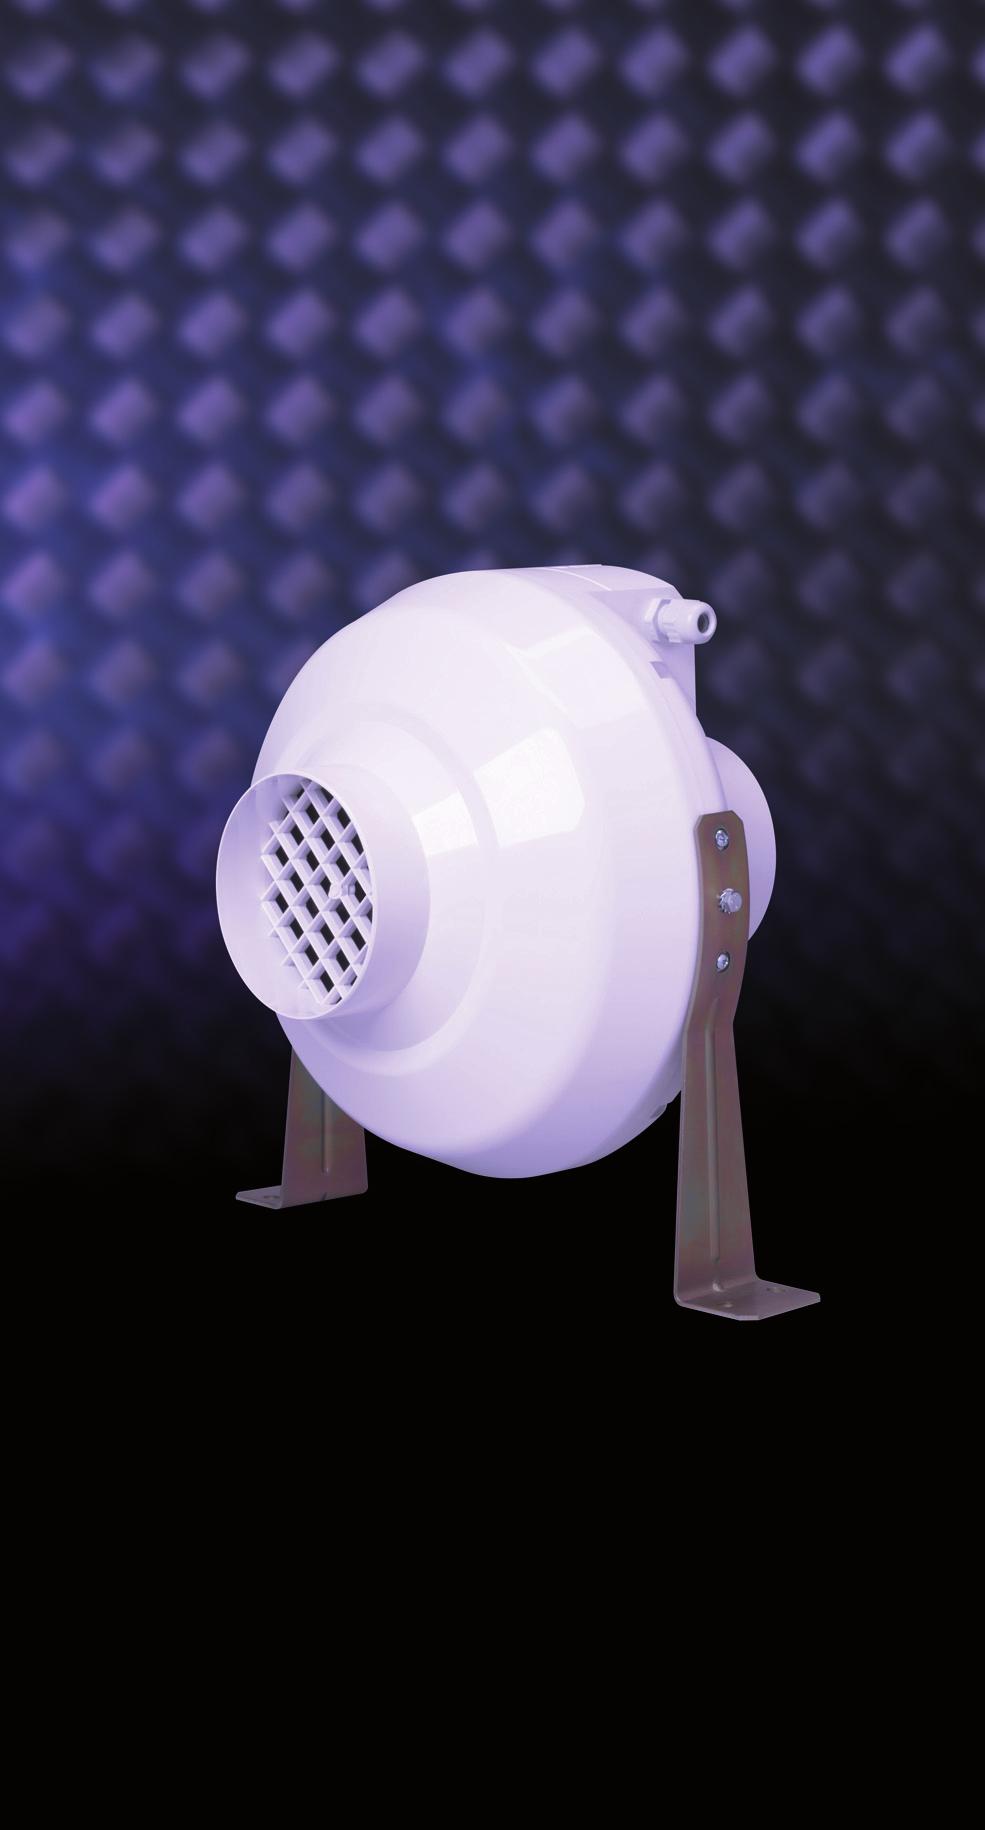 CENTRIFUGAL TUBE FANS (PLASTIC) UKV FAN RANGE Can be used in multiple rooms Excellent for long ducting runs Ideal for use with plastic systems Low noise and easy to install Complete with detachable